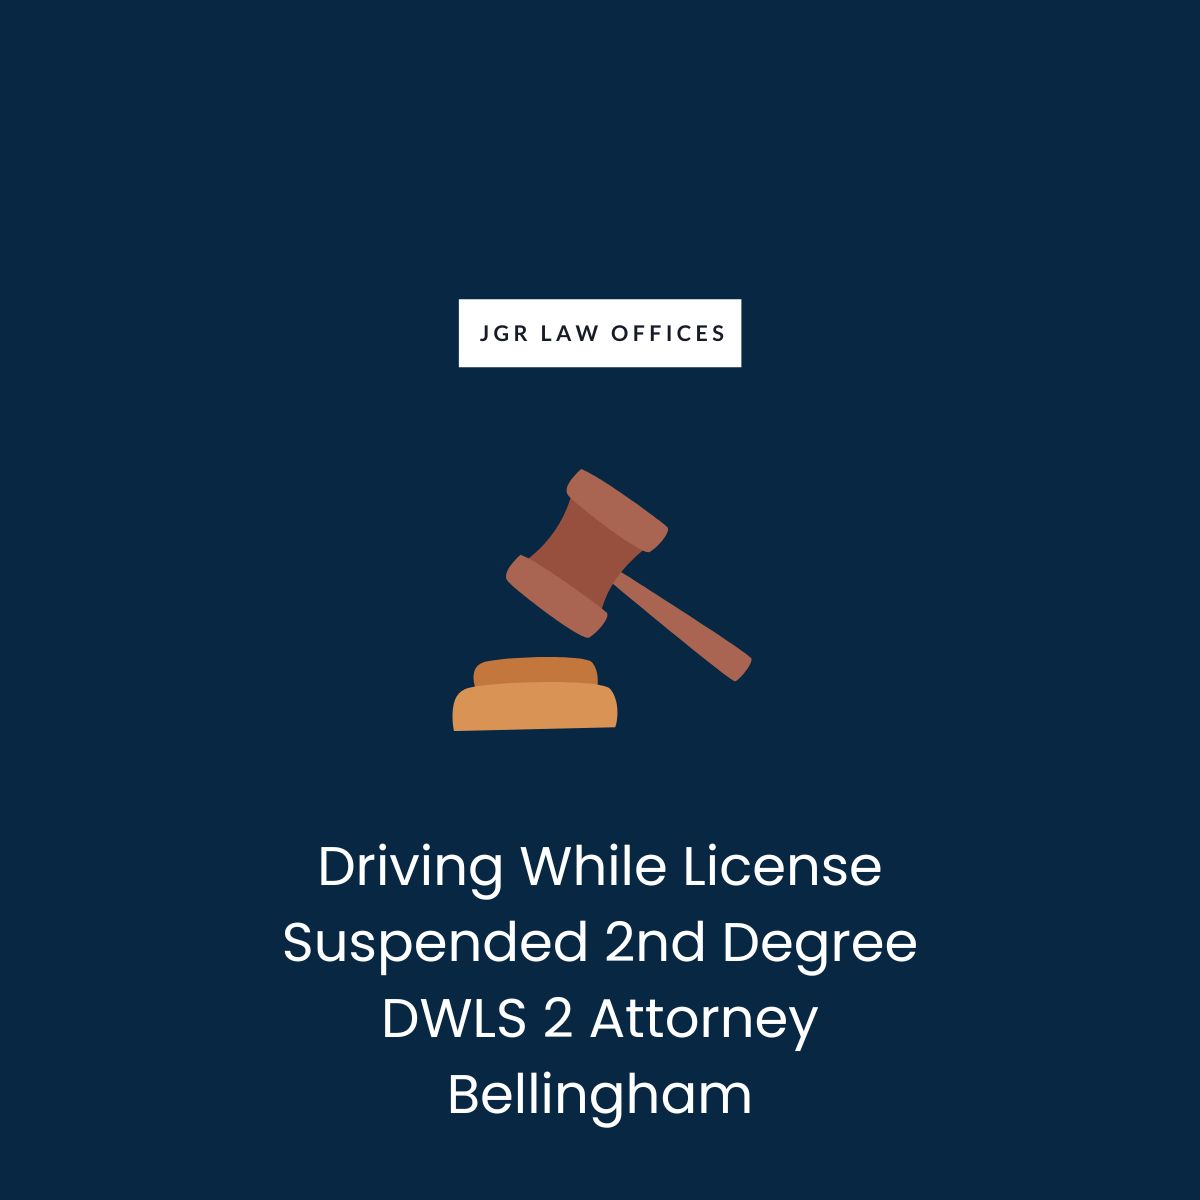 Driving While License Suspended 2nd Degree DWLS 2 Attorney Bellingham